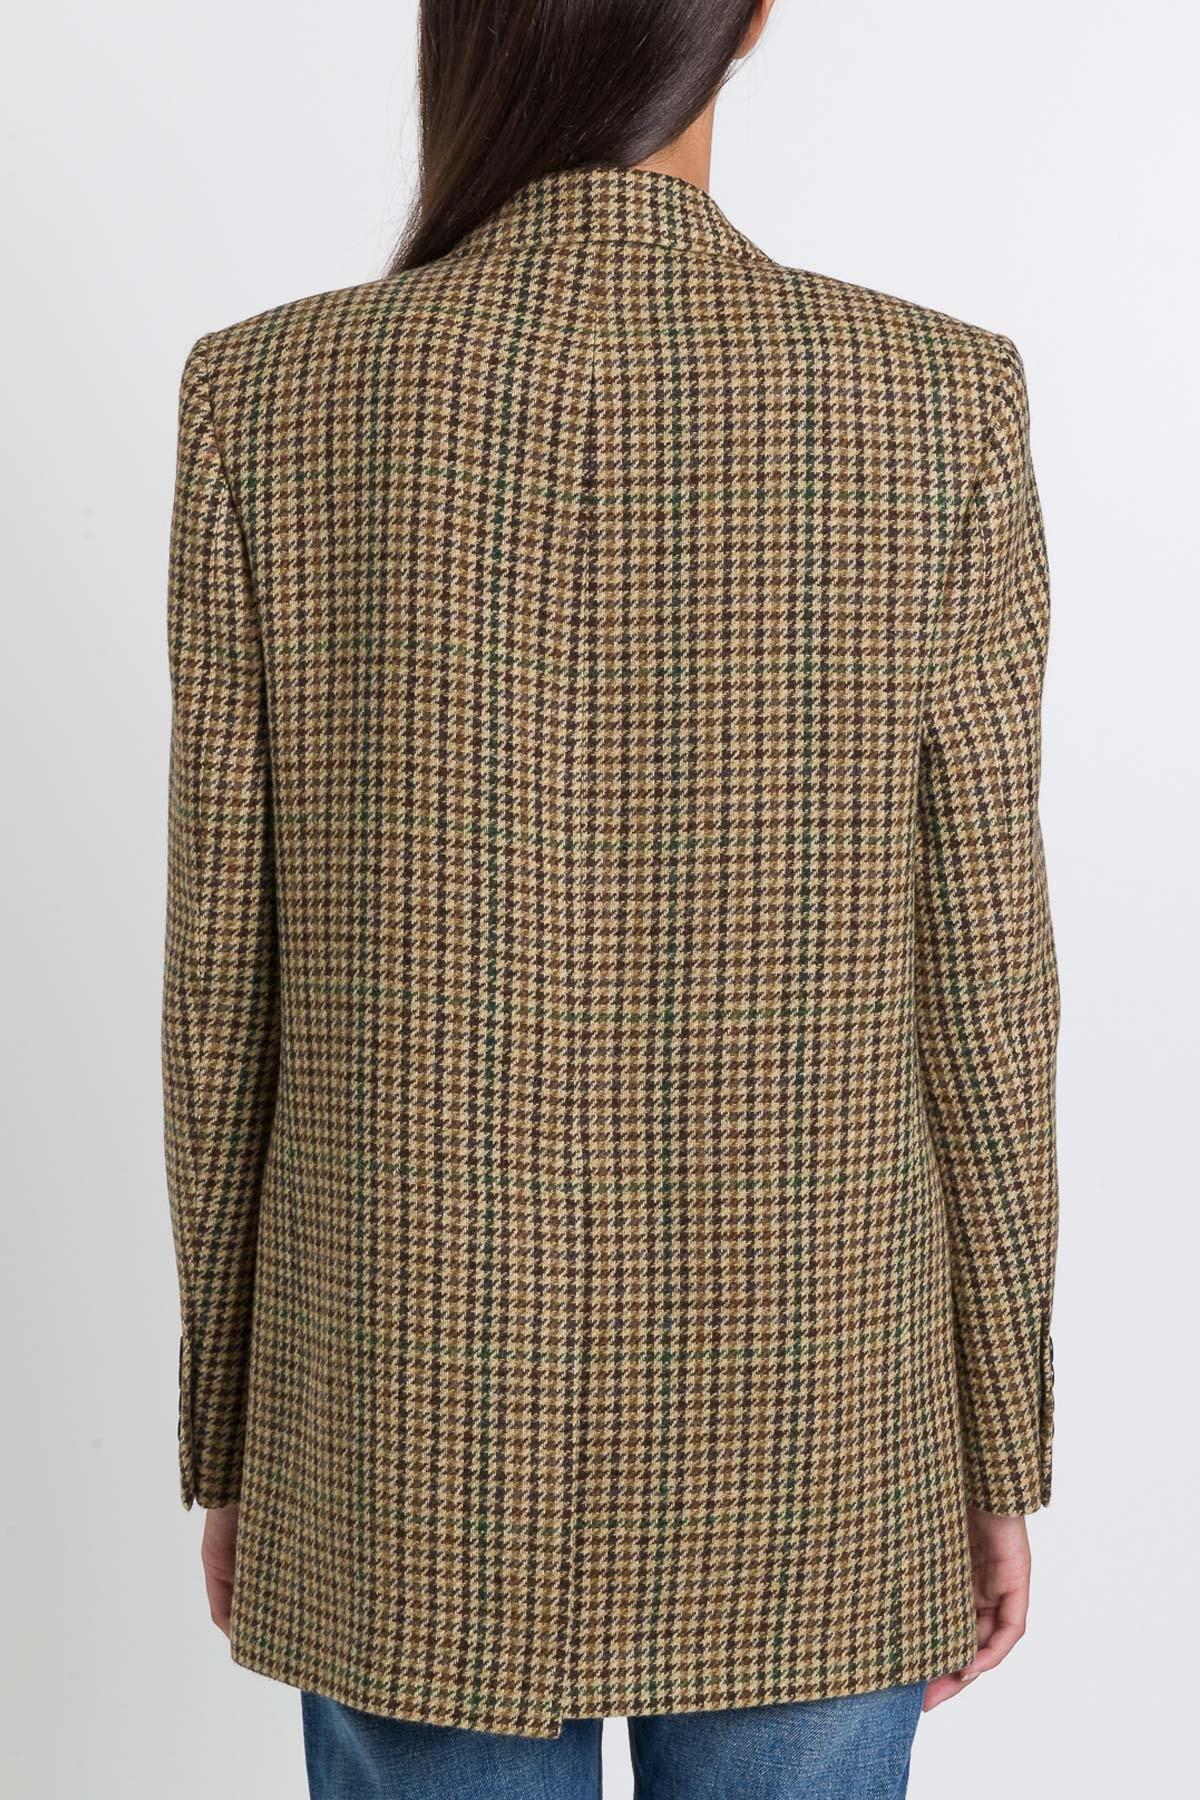 total Lion Incredible Celine Tournon Jacket In Checked Wool in Brown | Lyst